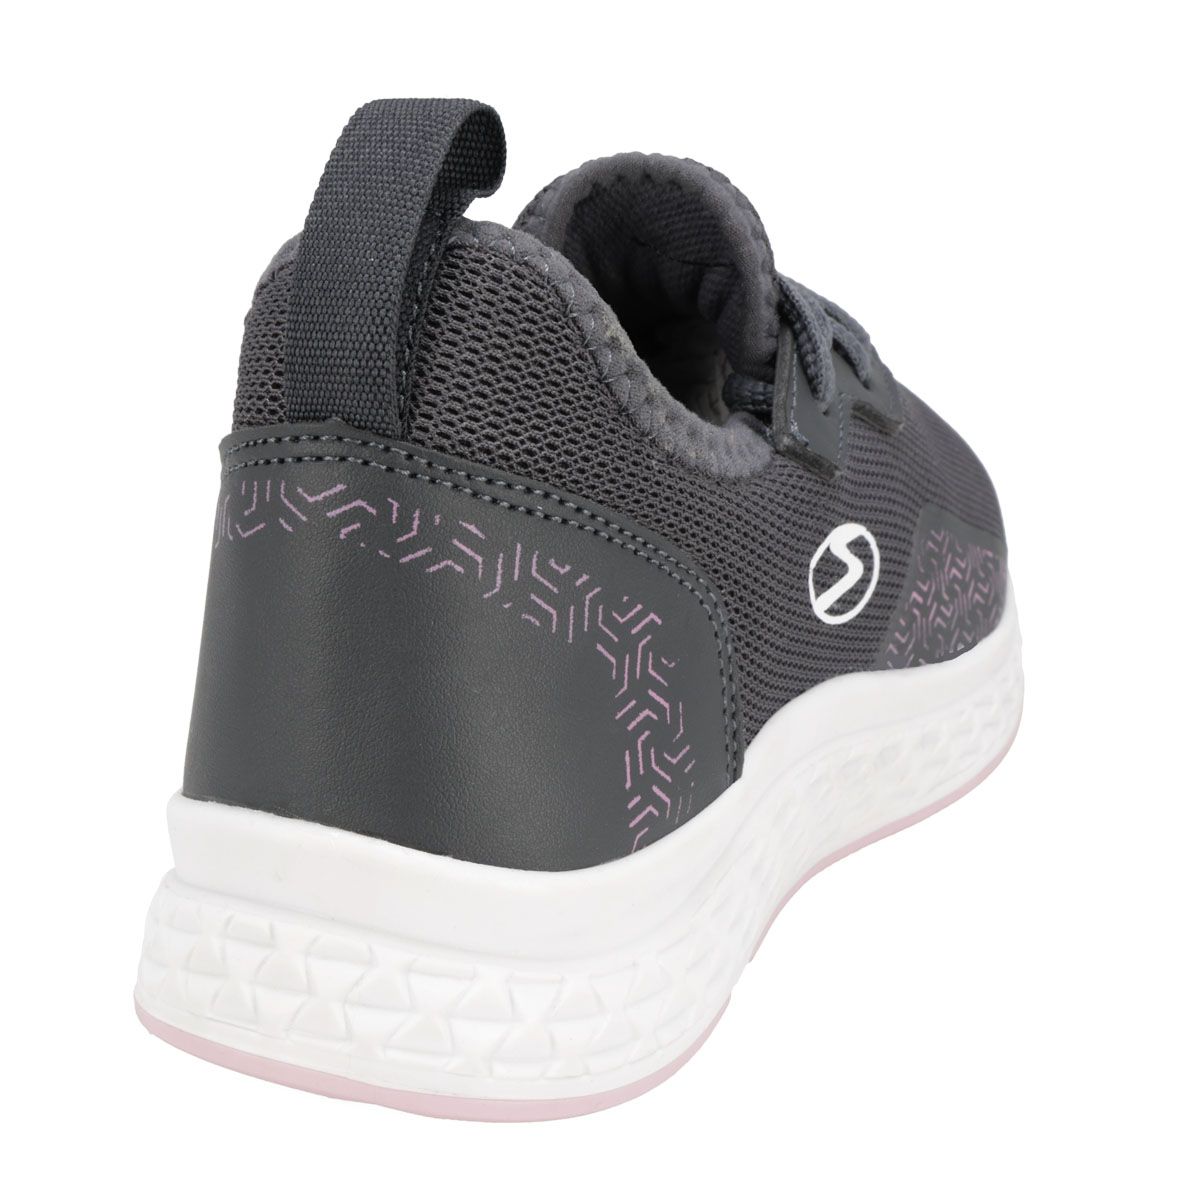 DEPORTIVO MUJER SCARE RS069 OXFORD/ROSA